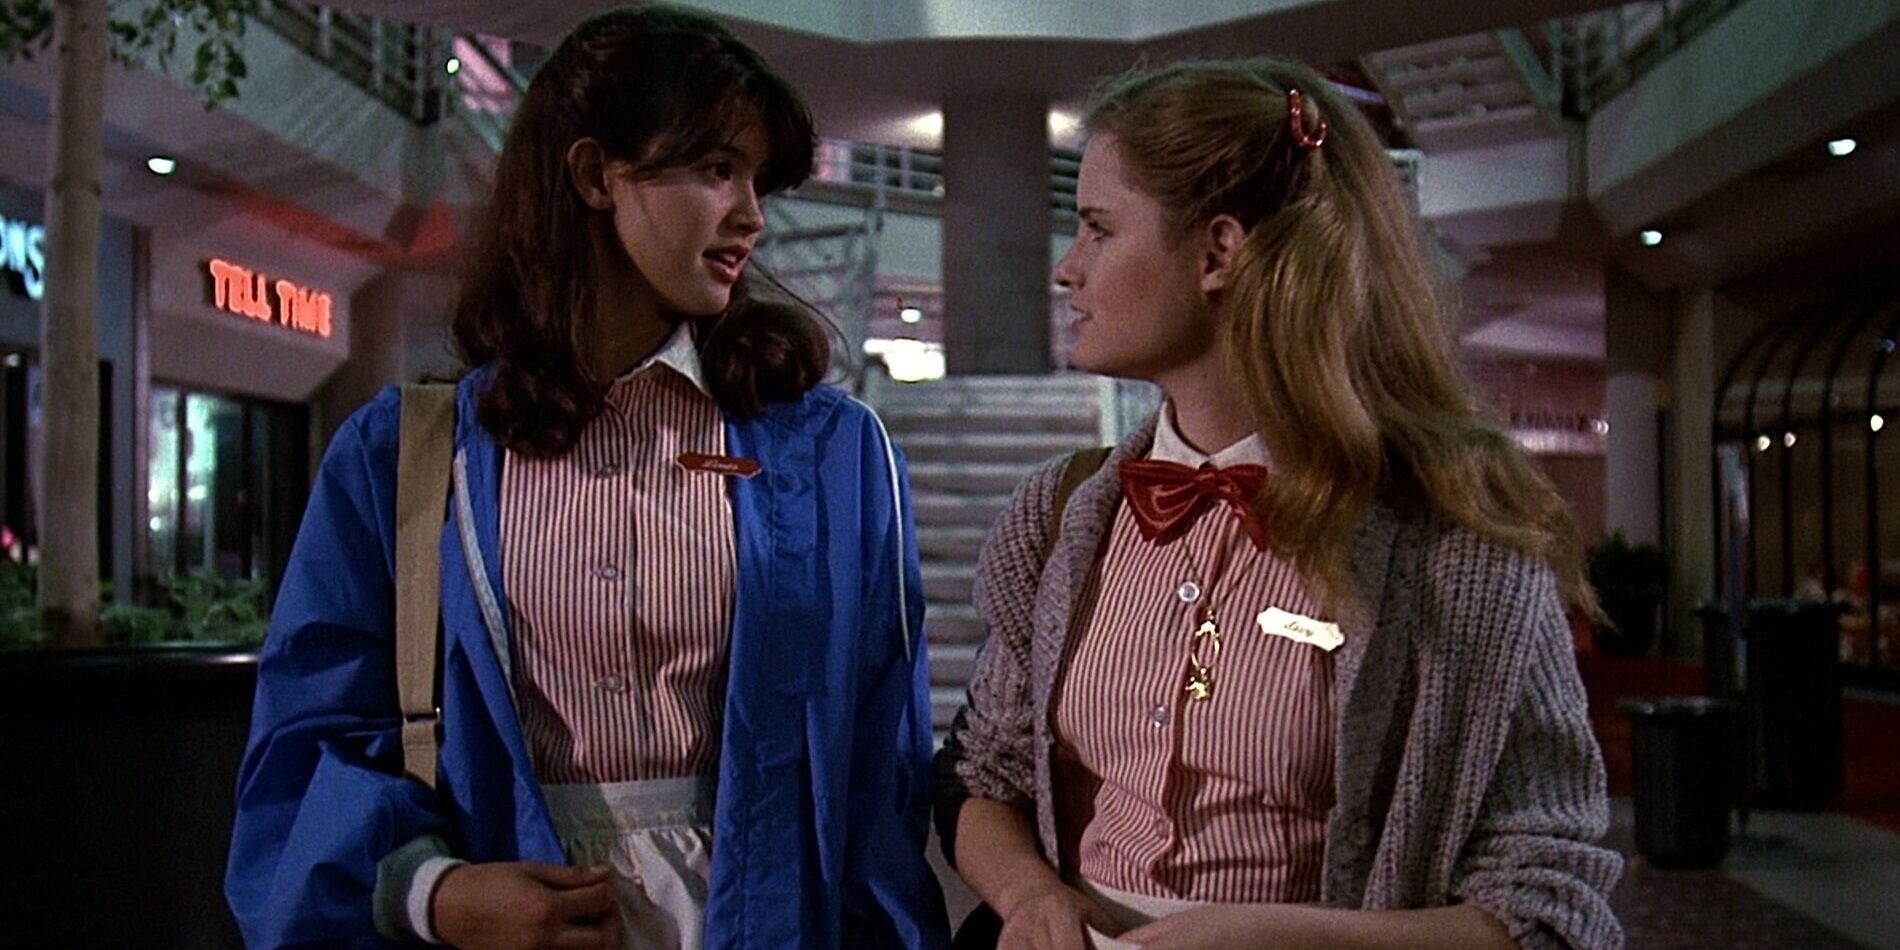 Linda and Stacy in the mall in Fast Times at Ridgemont High